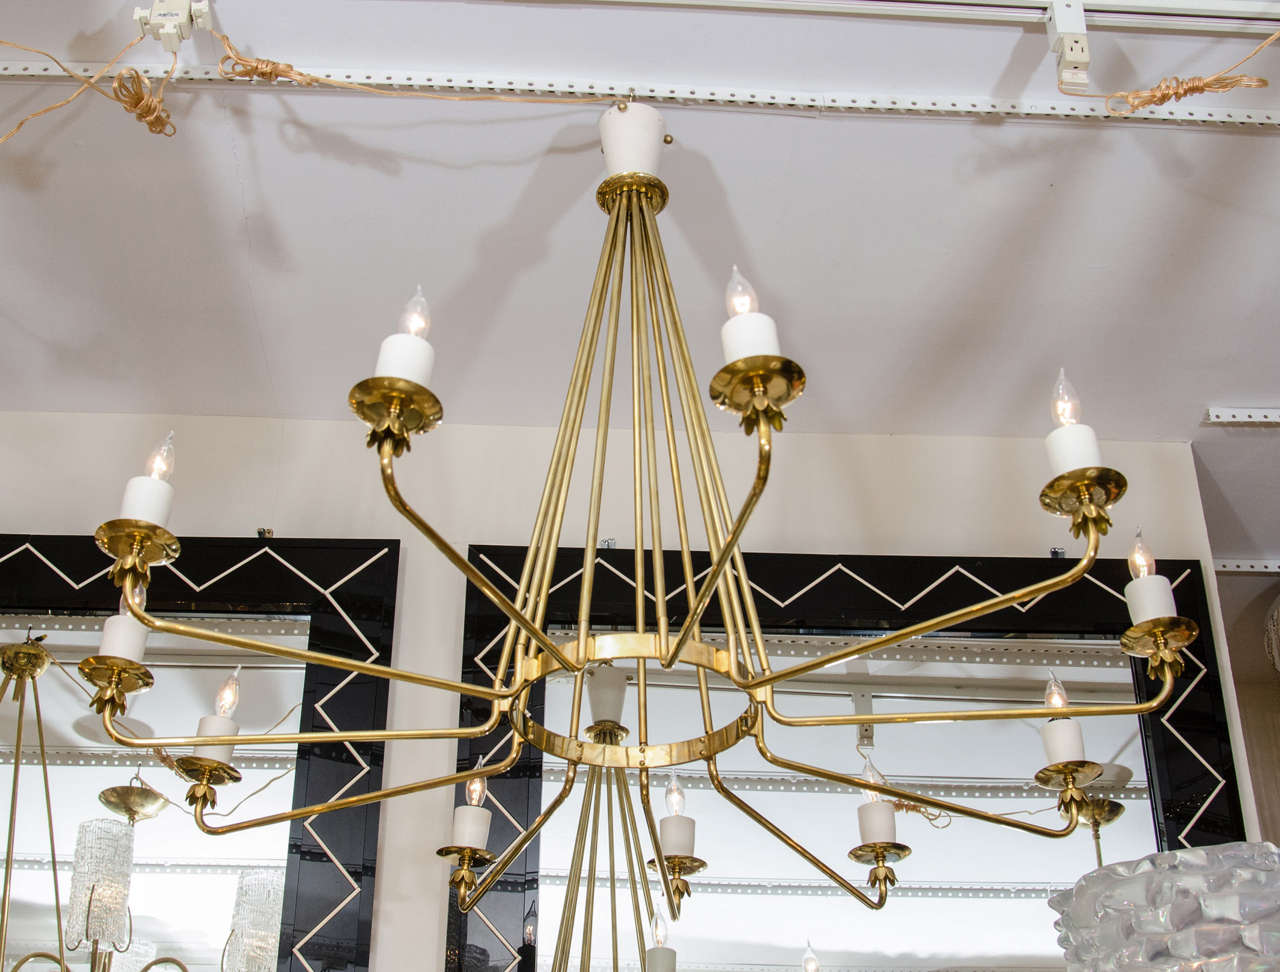 Brass and white enamel eleven light chandelier with decorative brass bobeches in the style of Stilnovo.